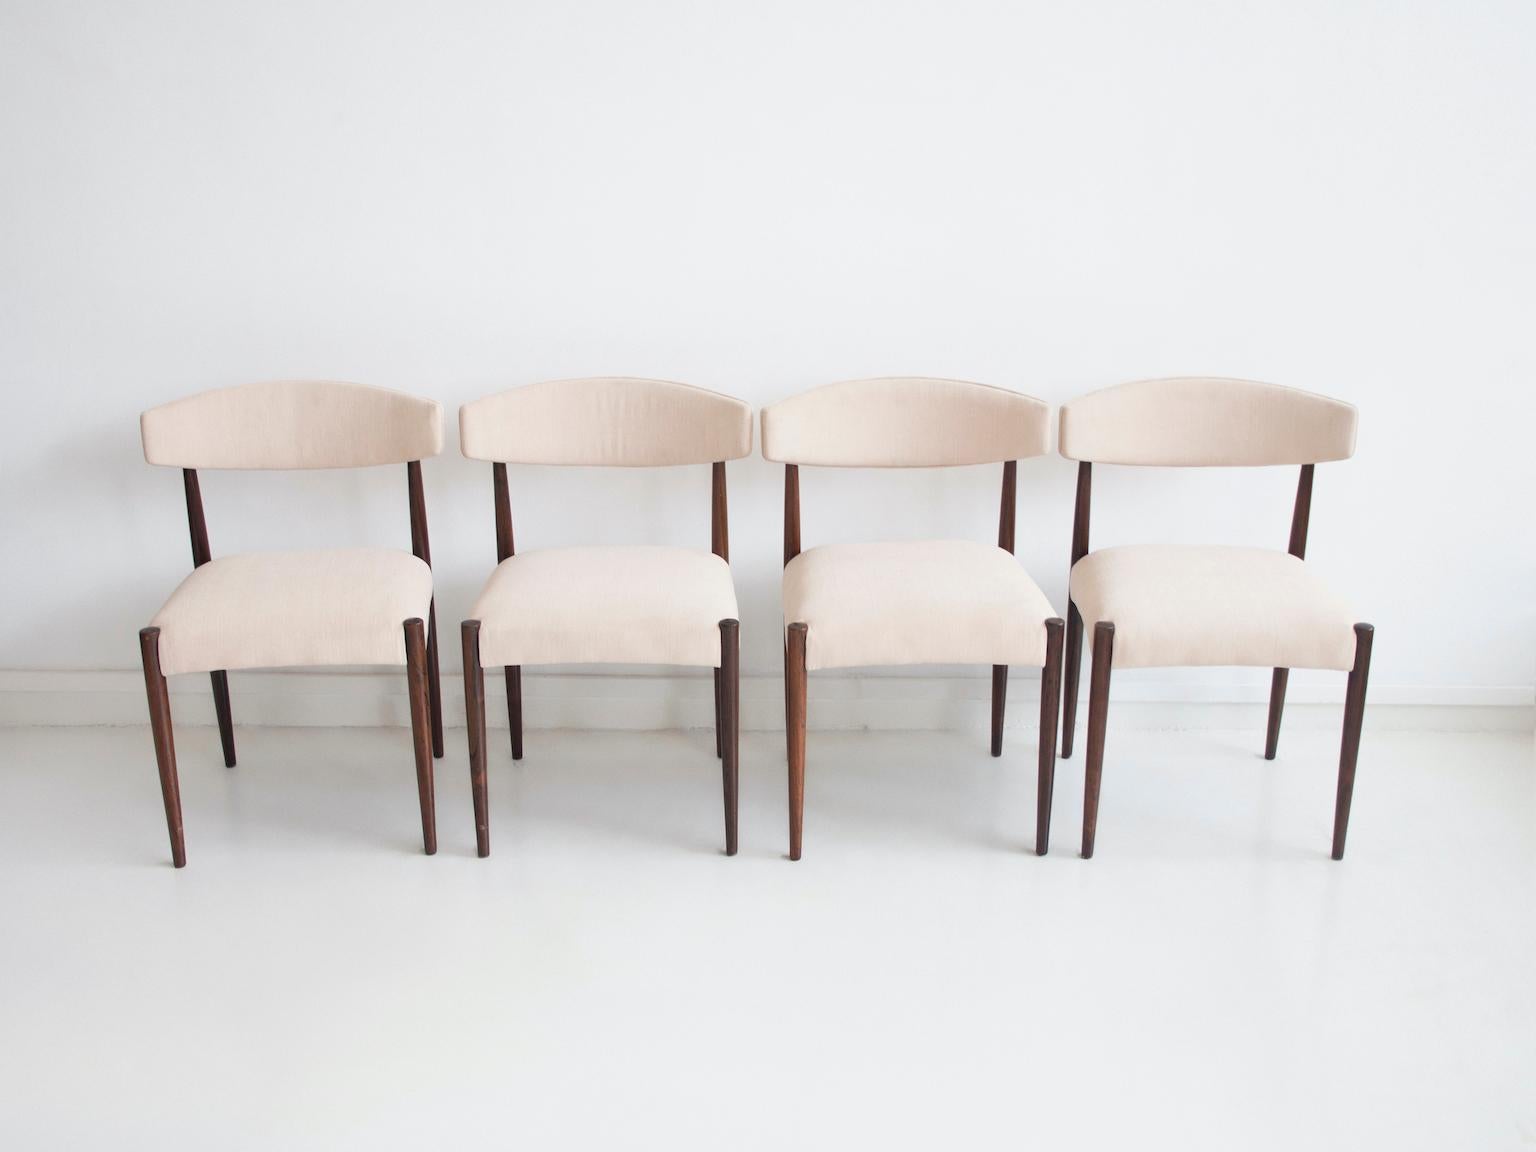 Four chairs made of kingwood from circa 1960. Later upholstery in white fabric. Manufactured in Denmark.